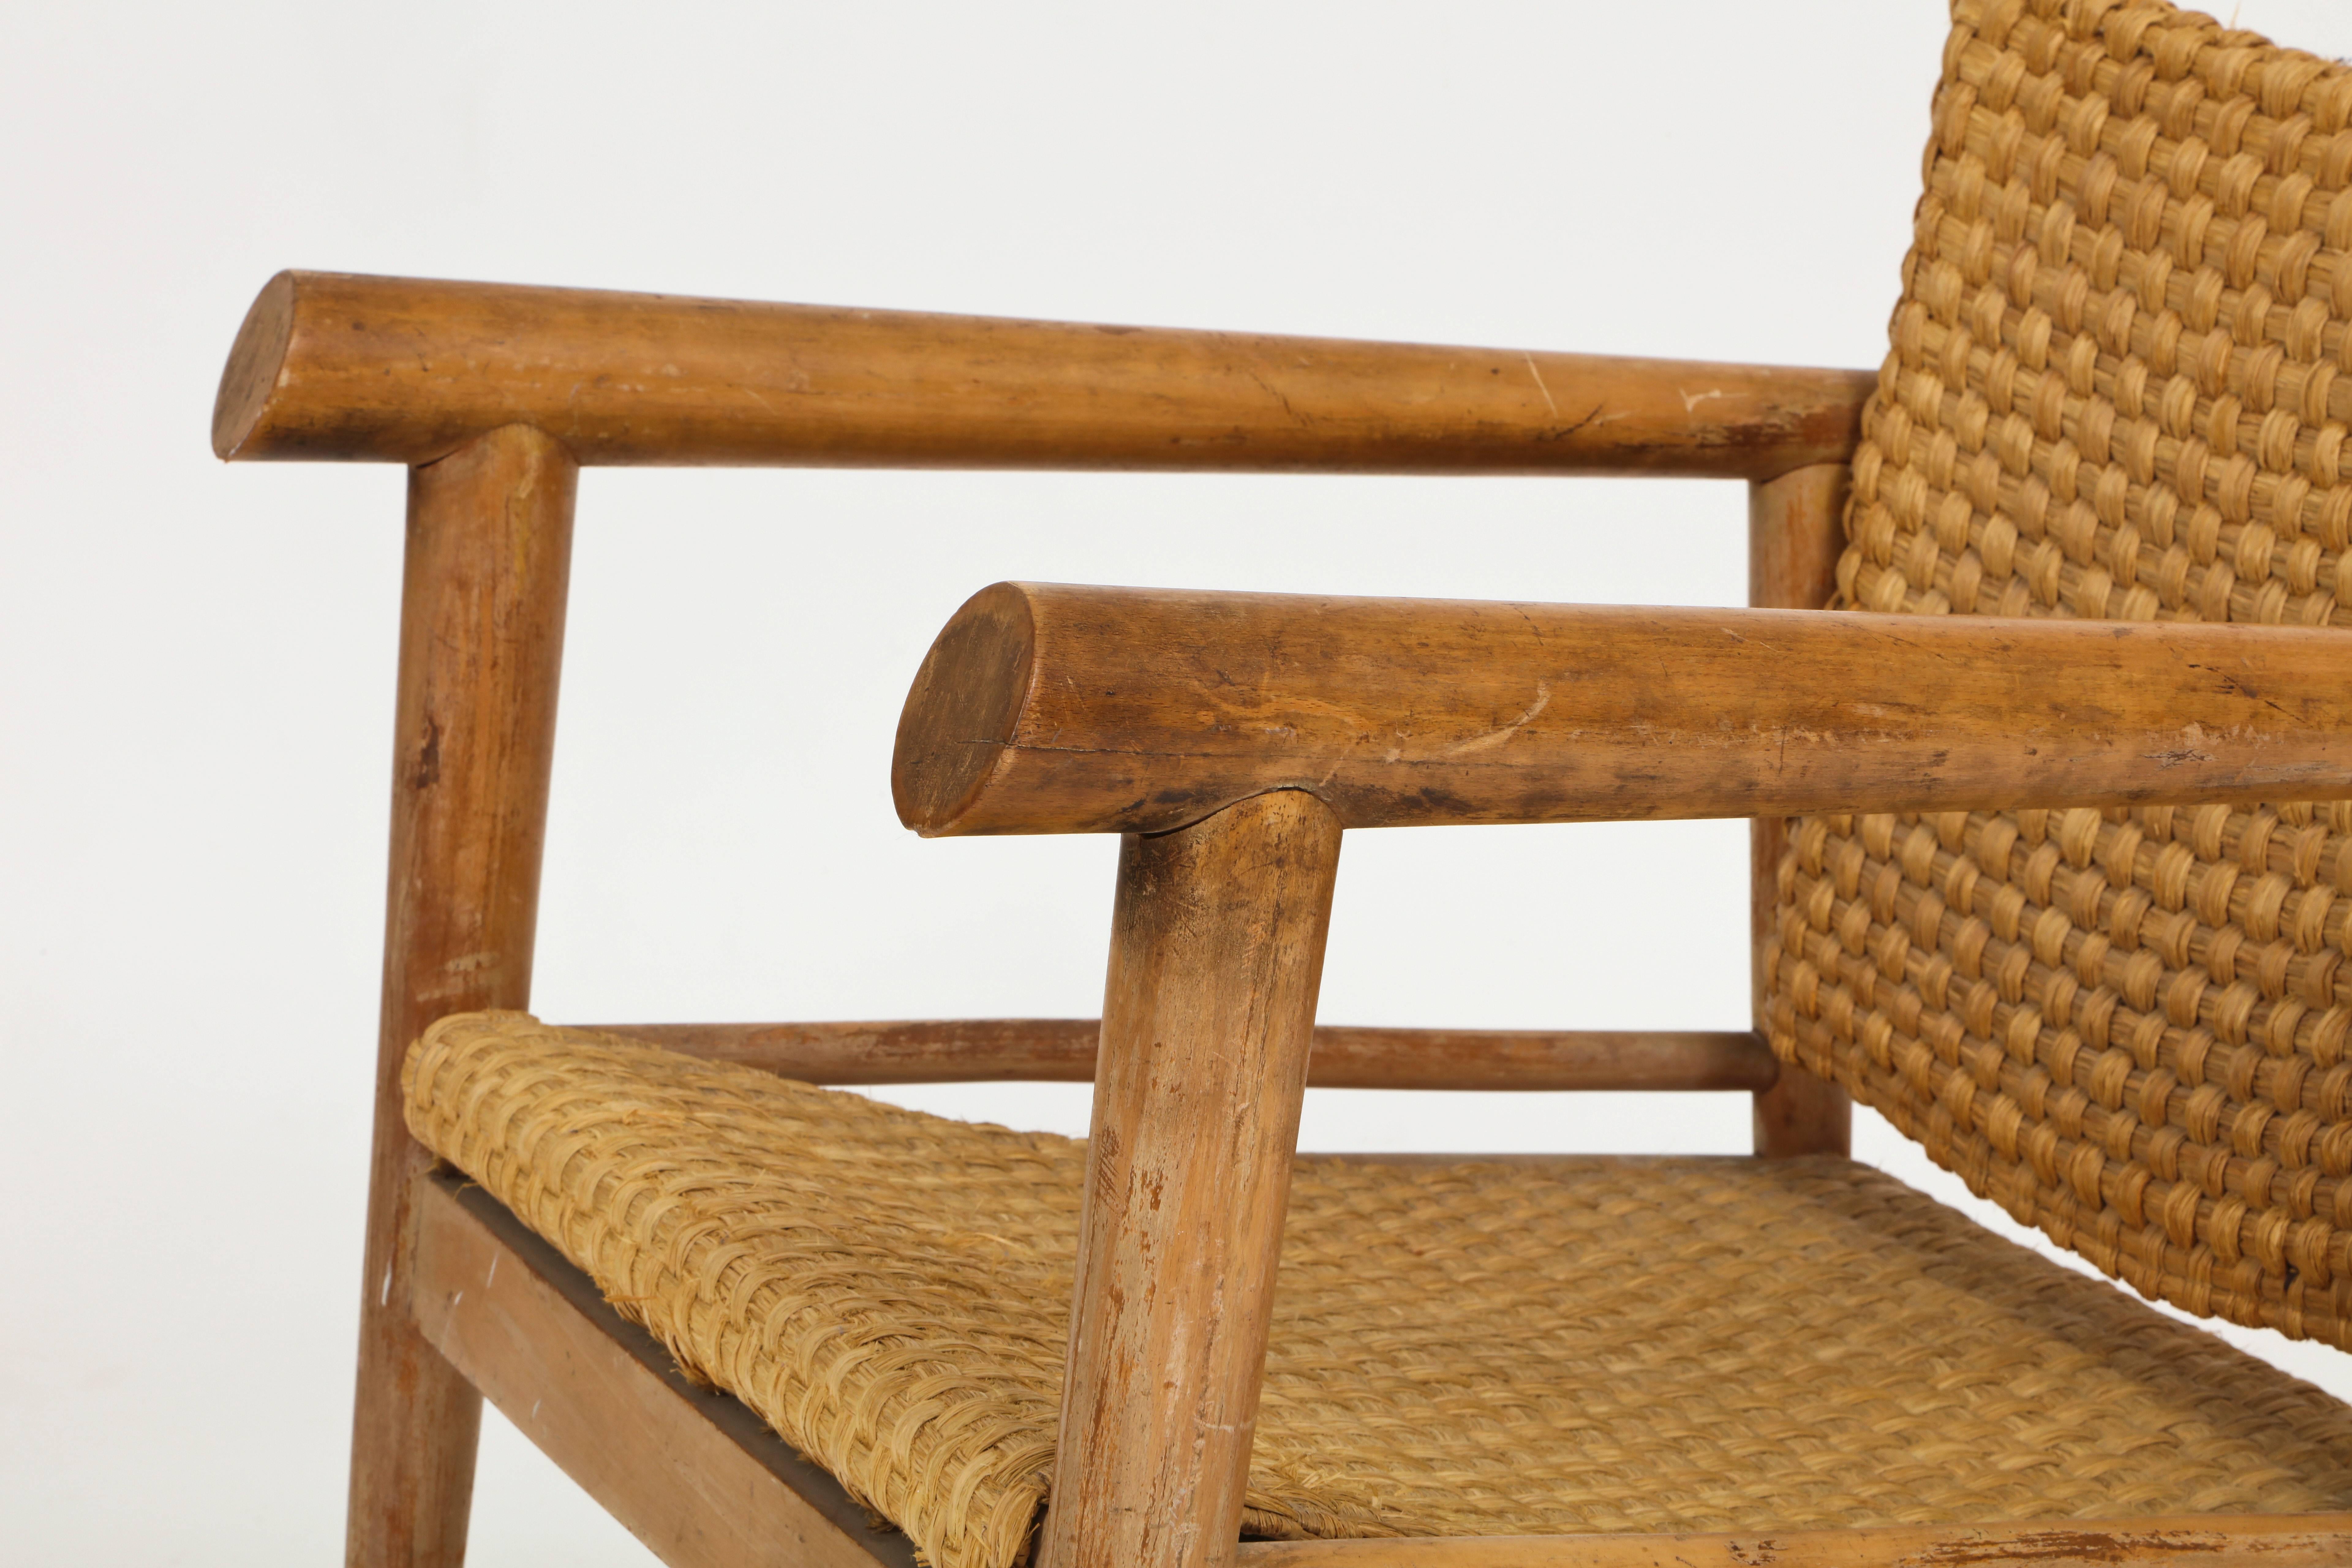 20th Century Straw Wicker Woven Rush Chair Midcentury Jean Michel Frank Style, 1930, France For Sale